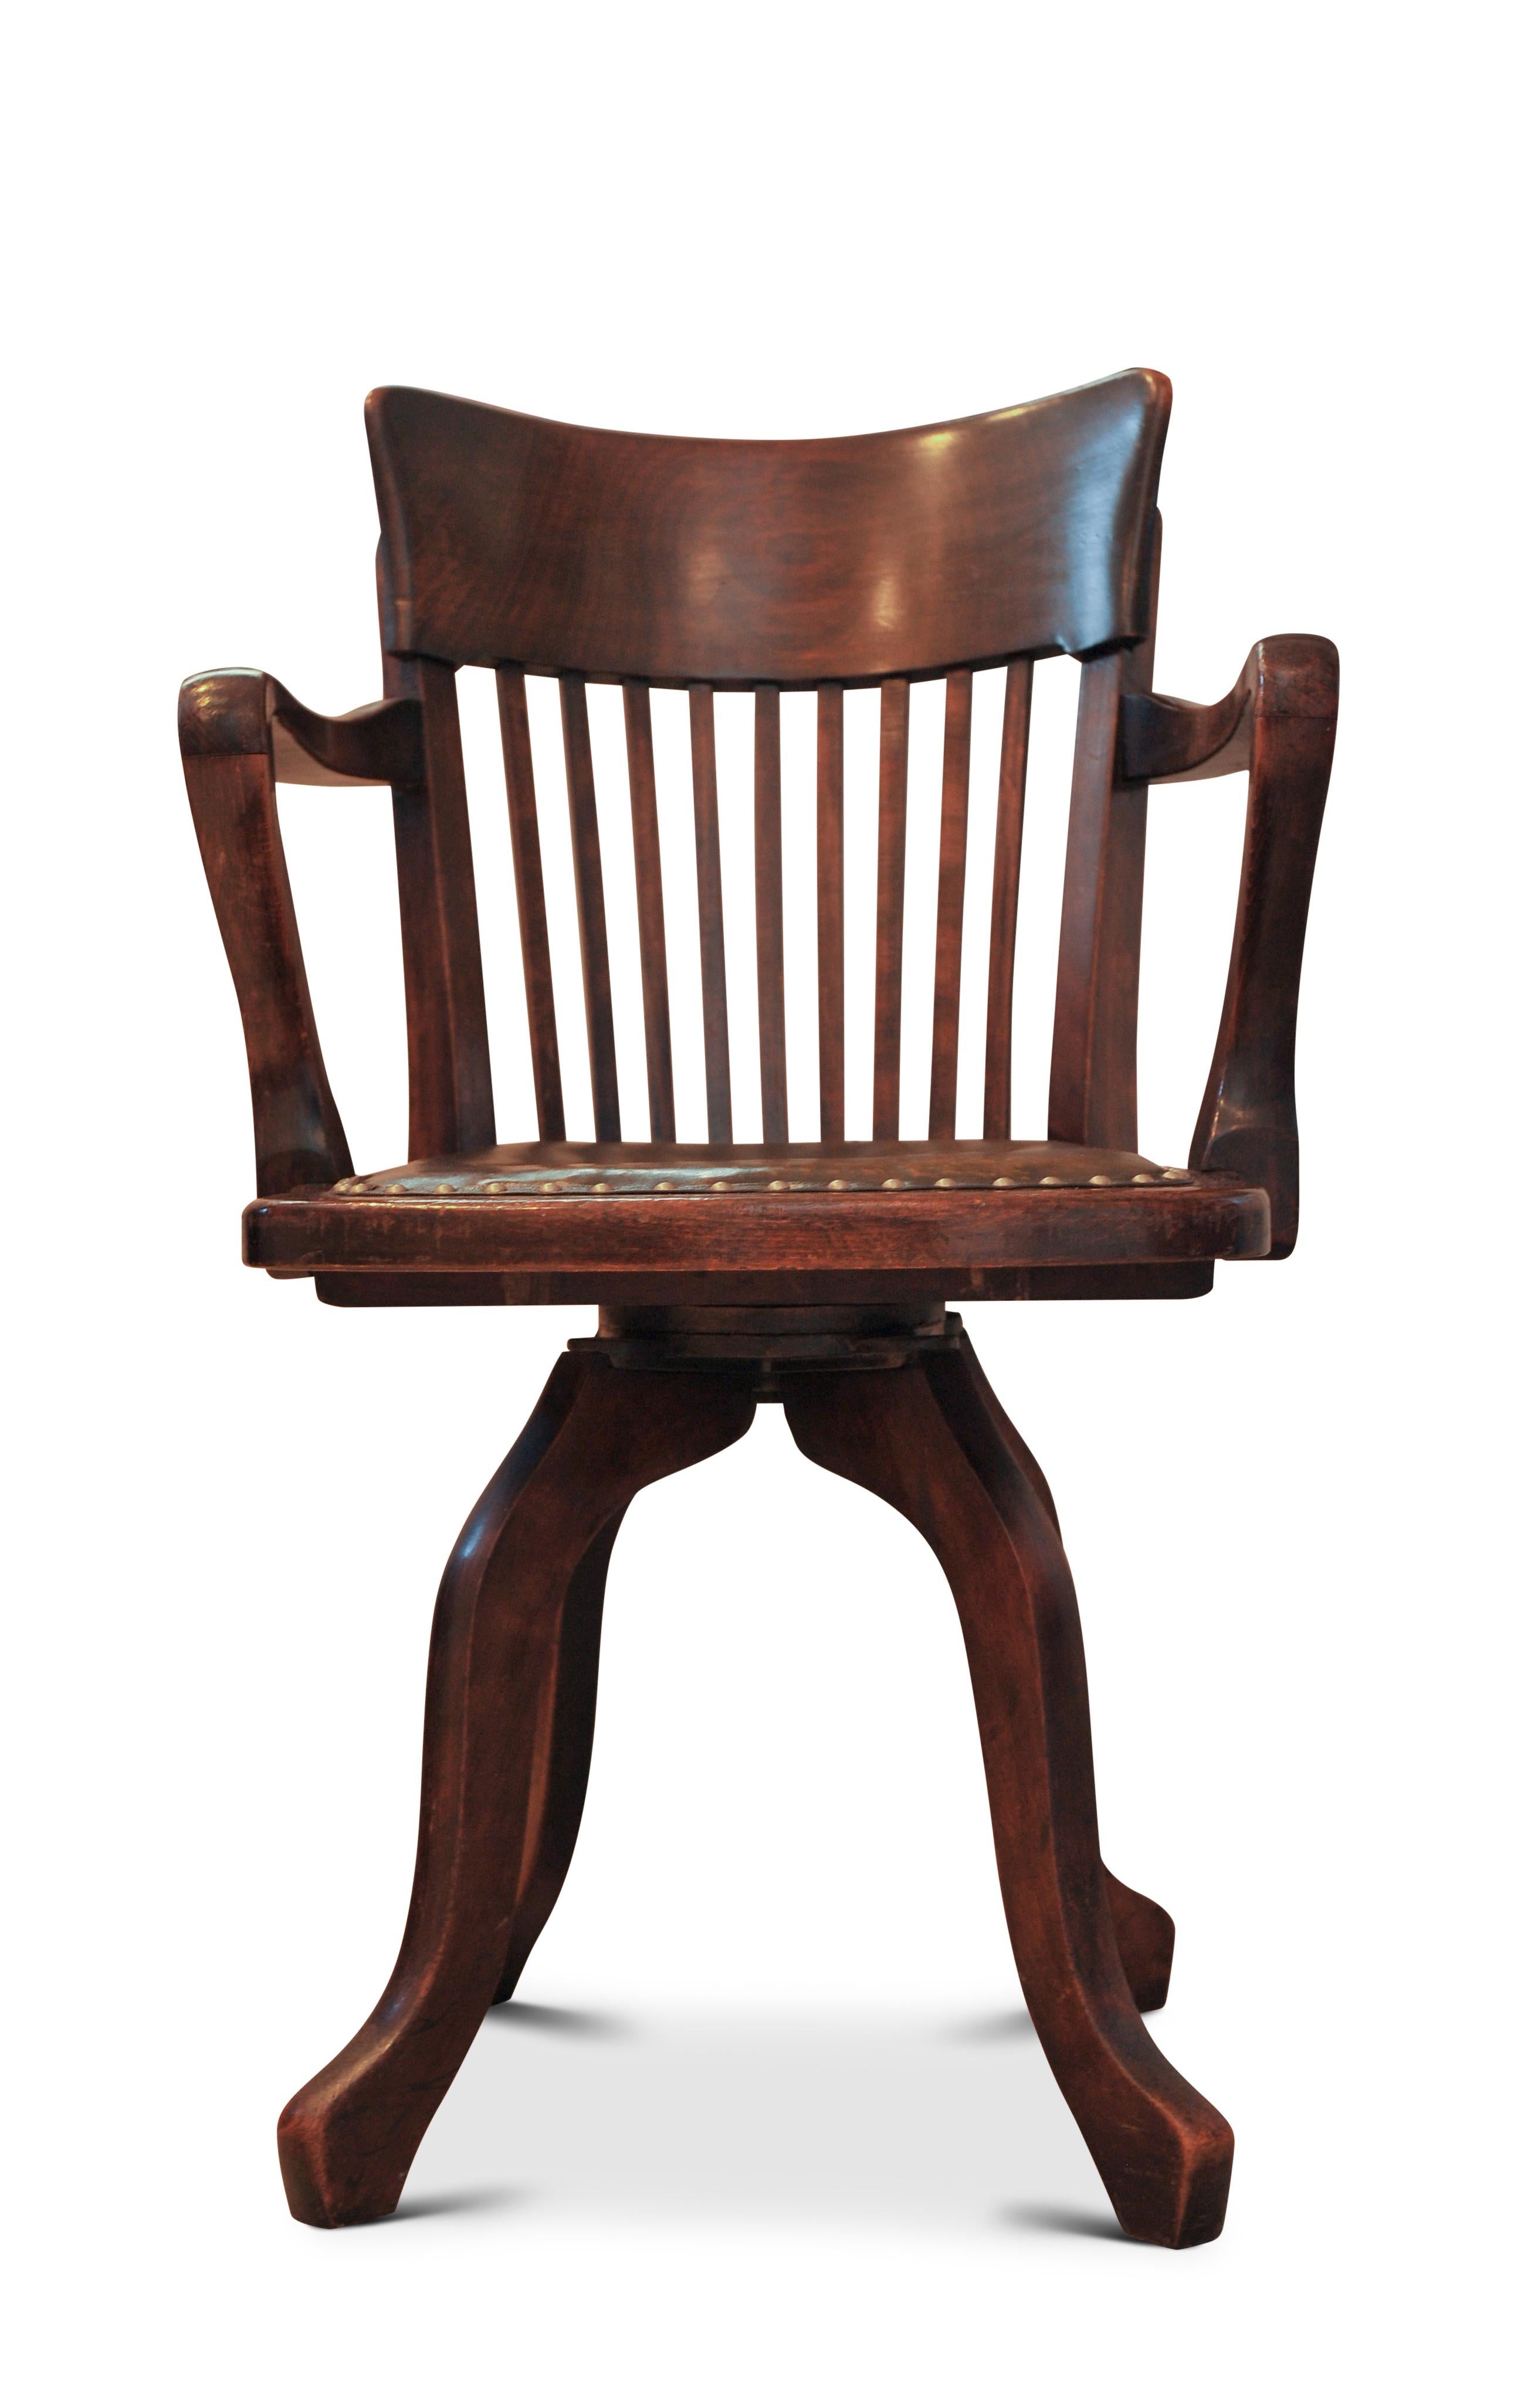 Victorian Oak & Leather Rail Back Revolving Desk Chair With Stud Detailing  In Good Condition For Sale In High Wycombe, GB